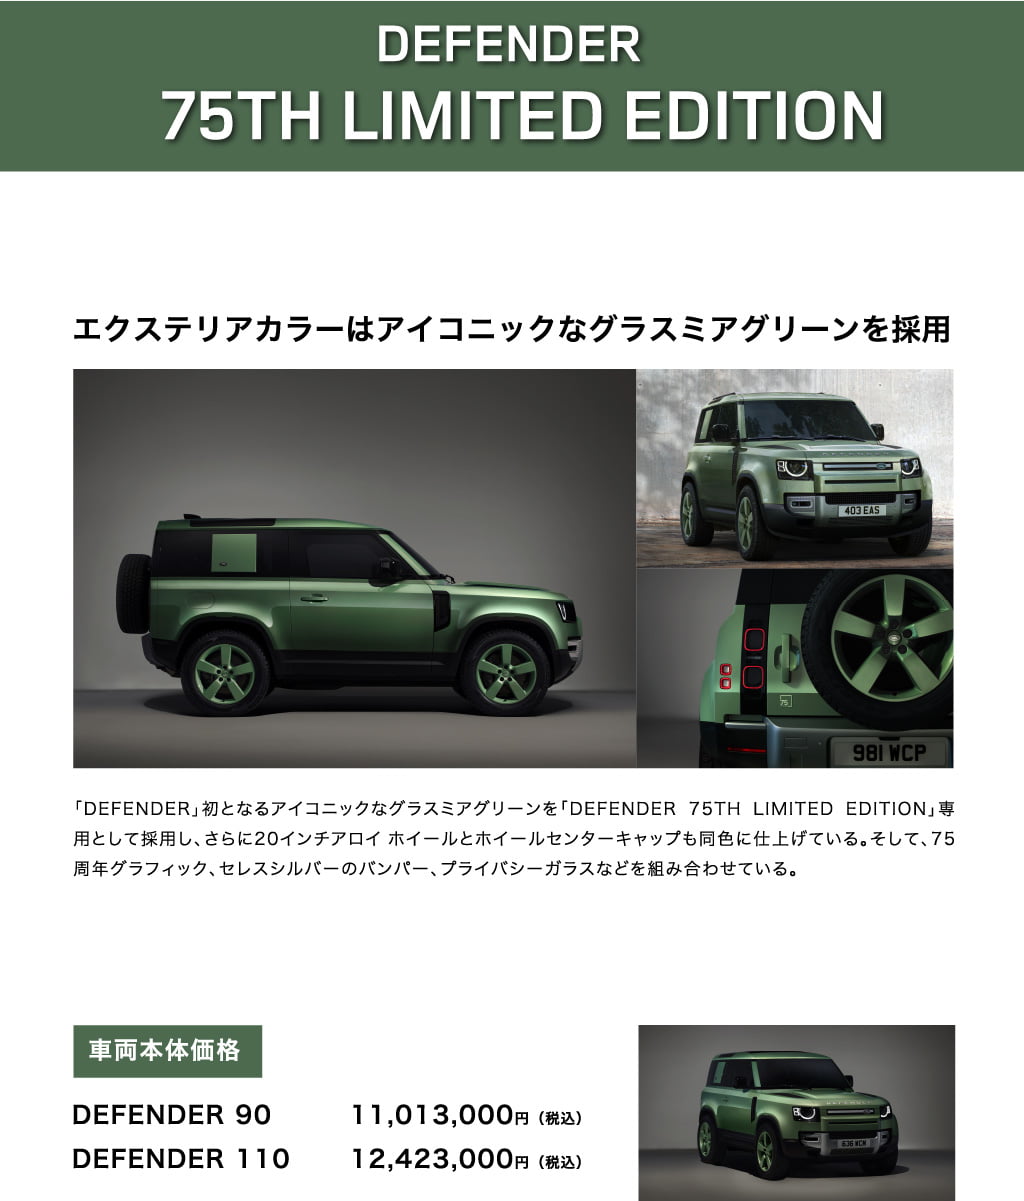 DEFENDER 75TH LIMITED EDITION